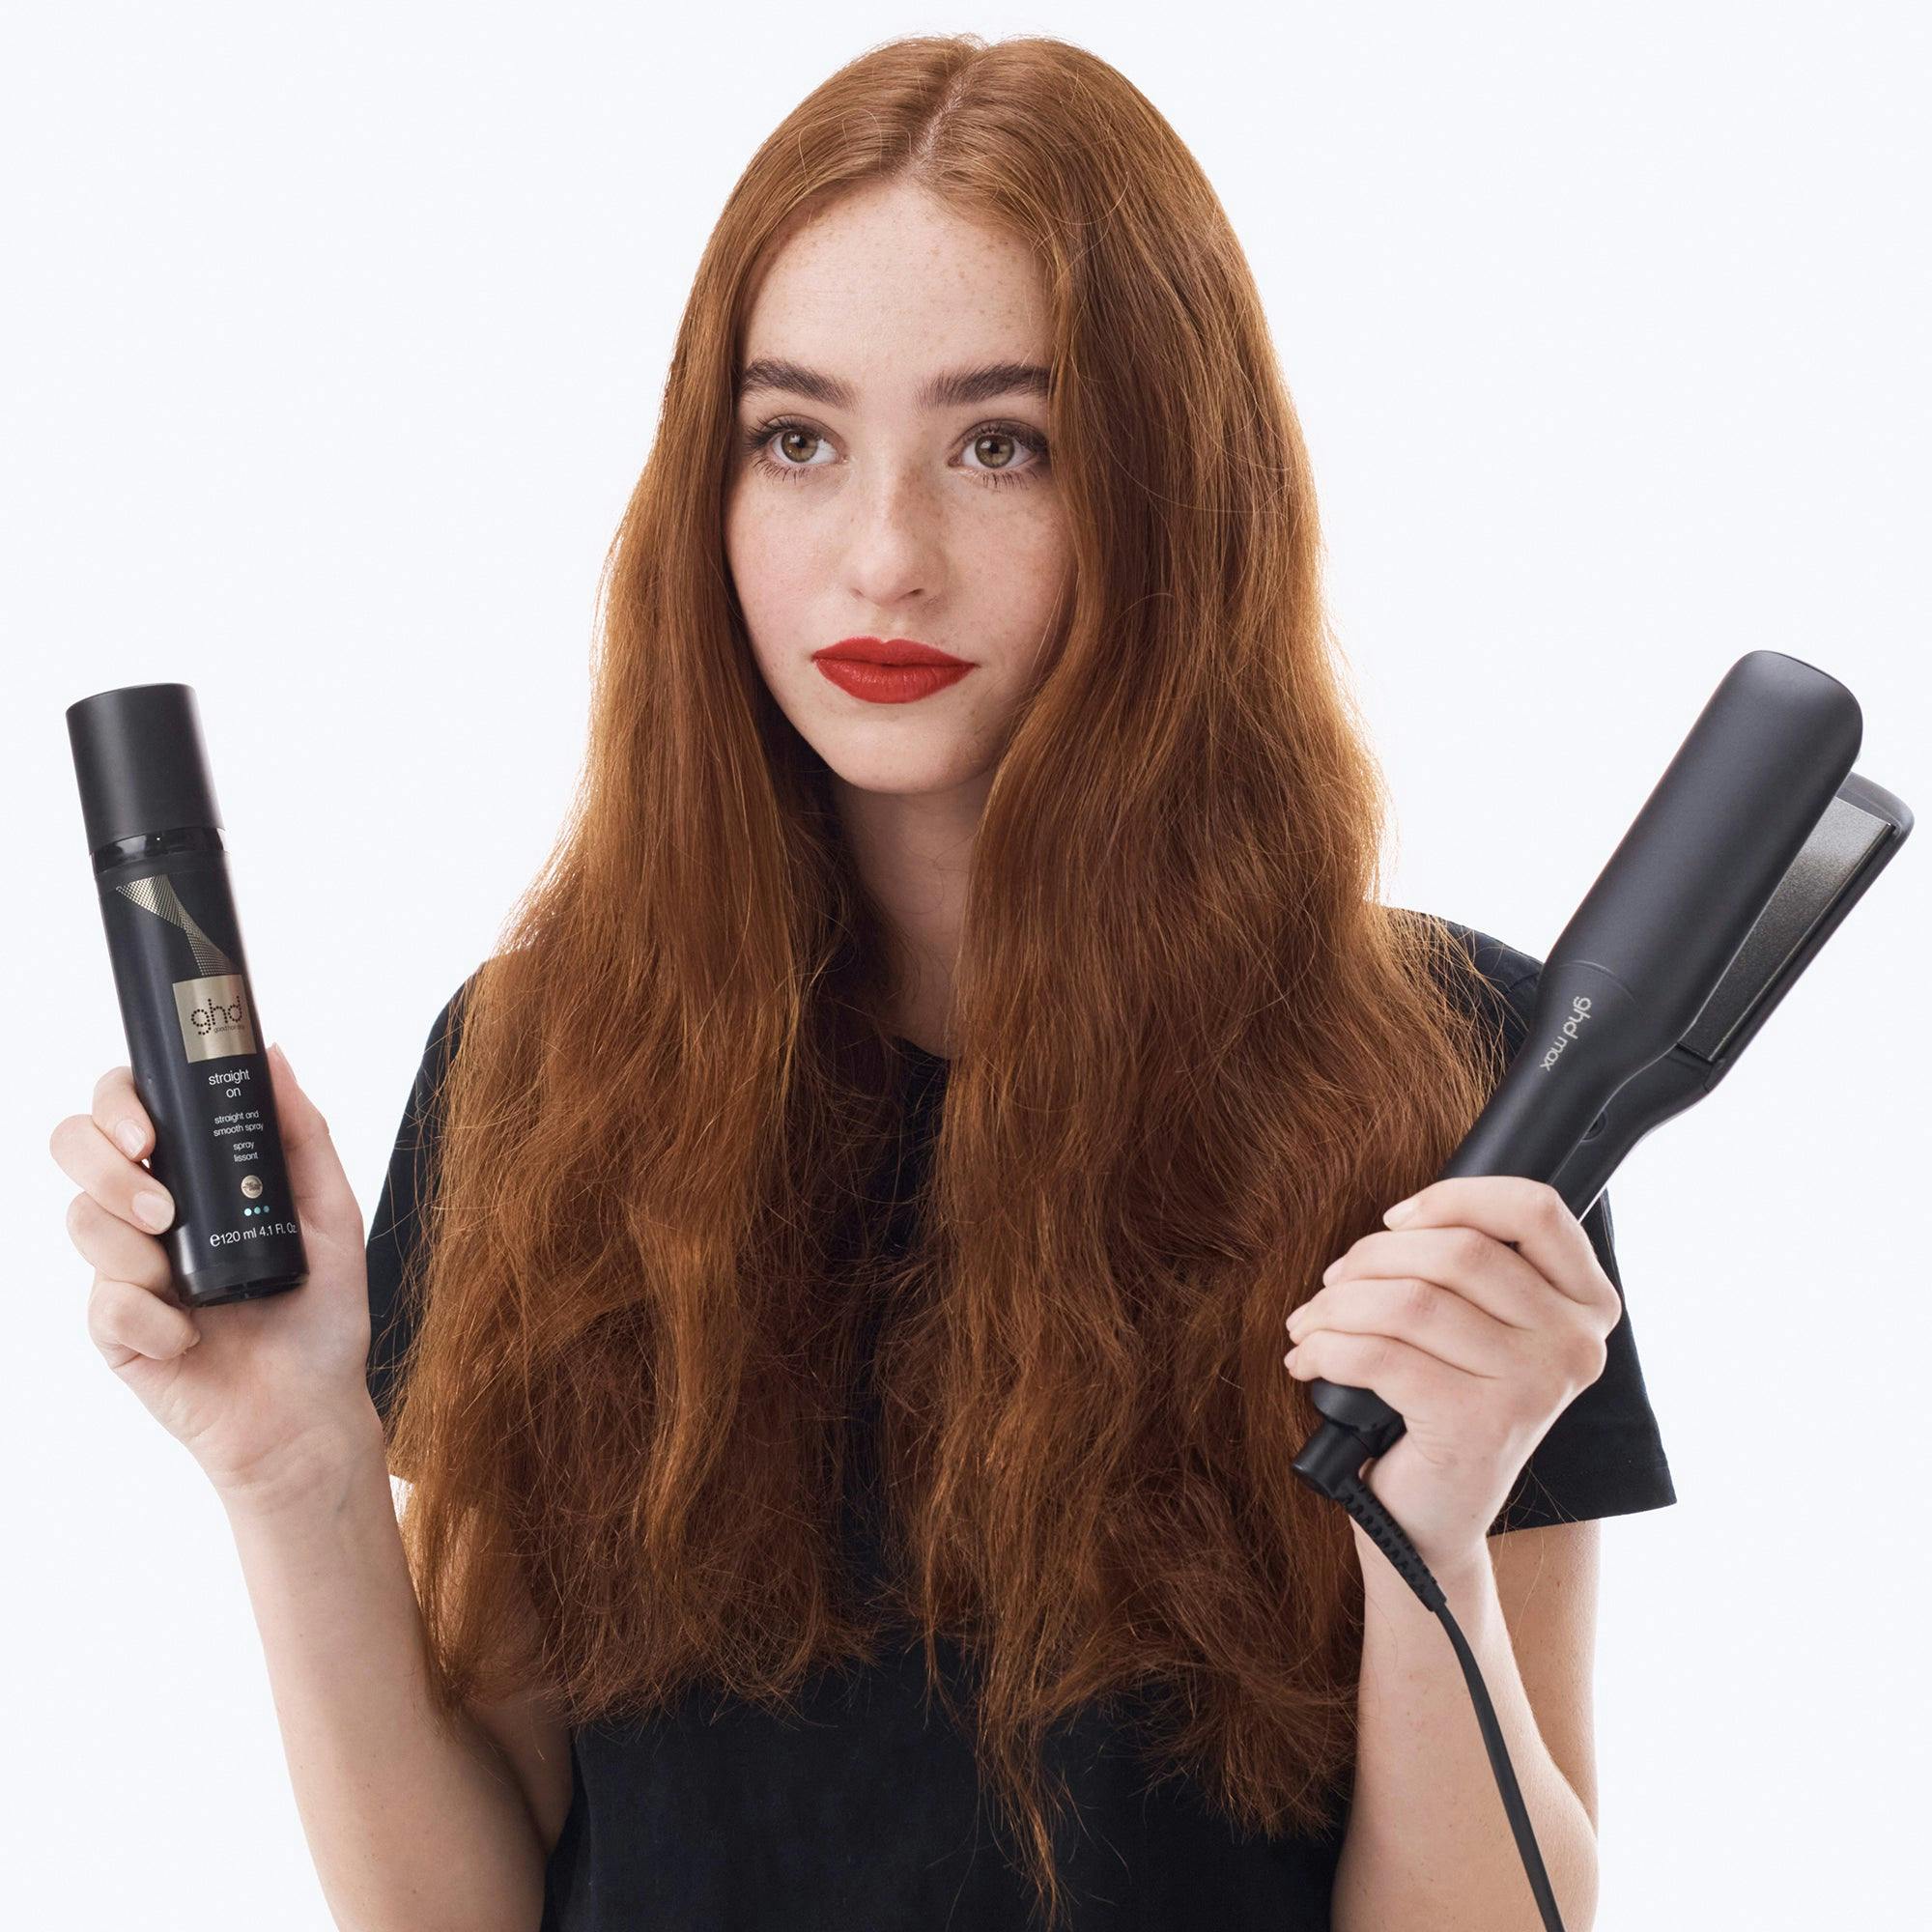 ghd Heat Protectant Styling Bundle